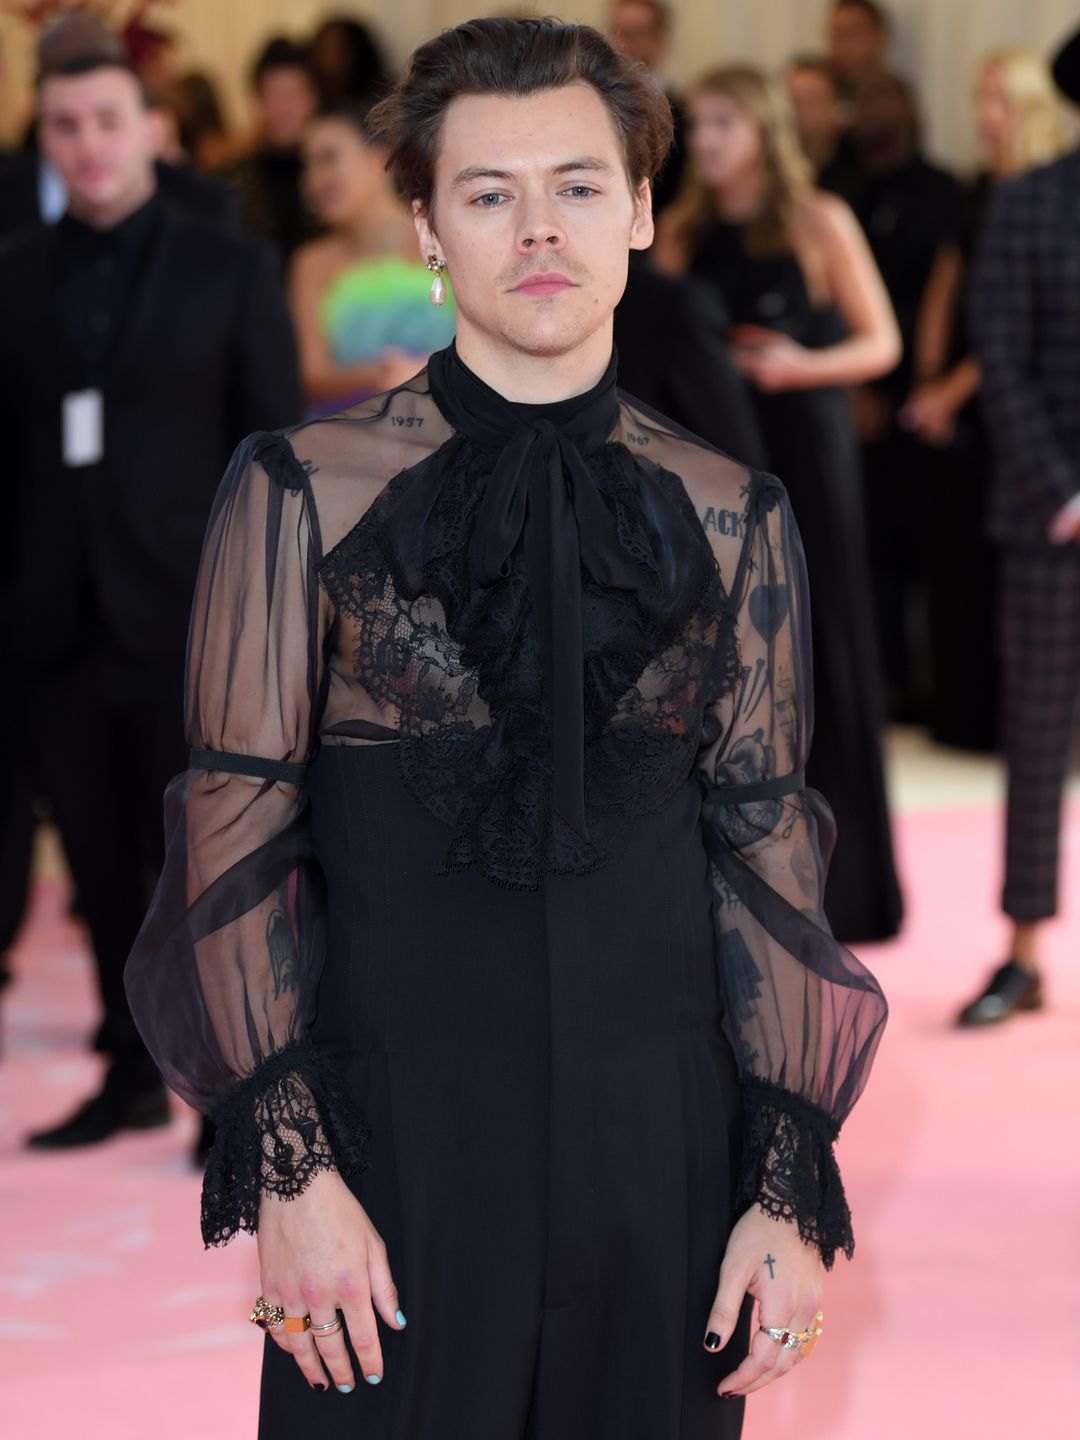 Harry Styles arrives for the 2019 Met Gala wearing a lace black jumpsuit and single pearl earring